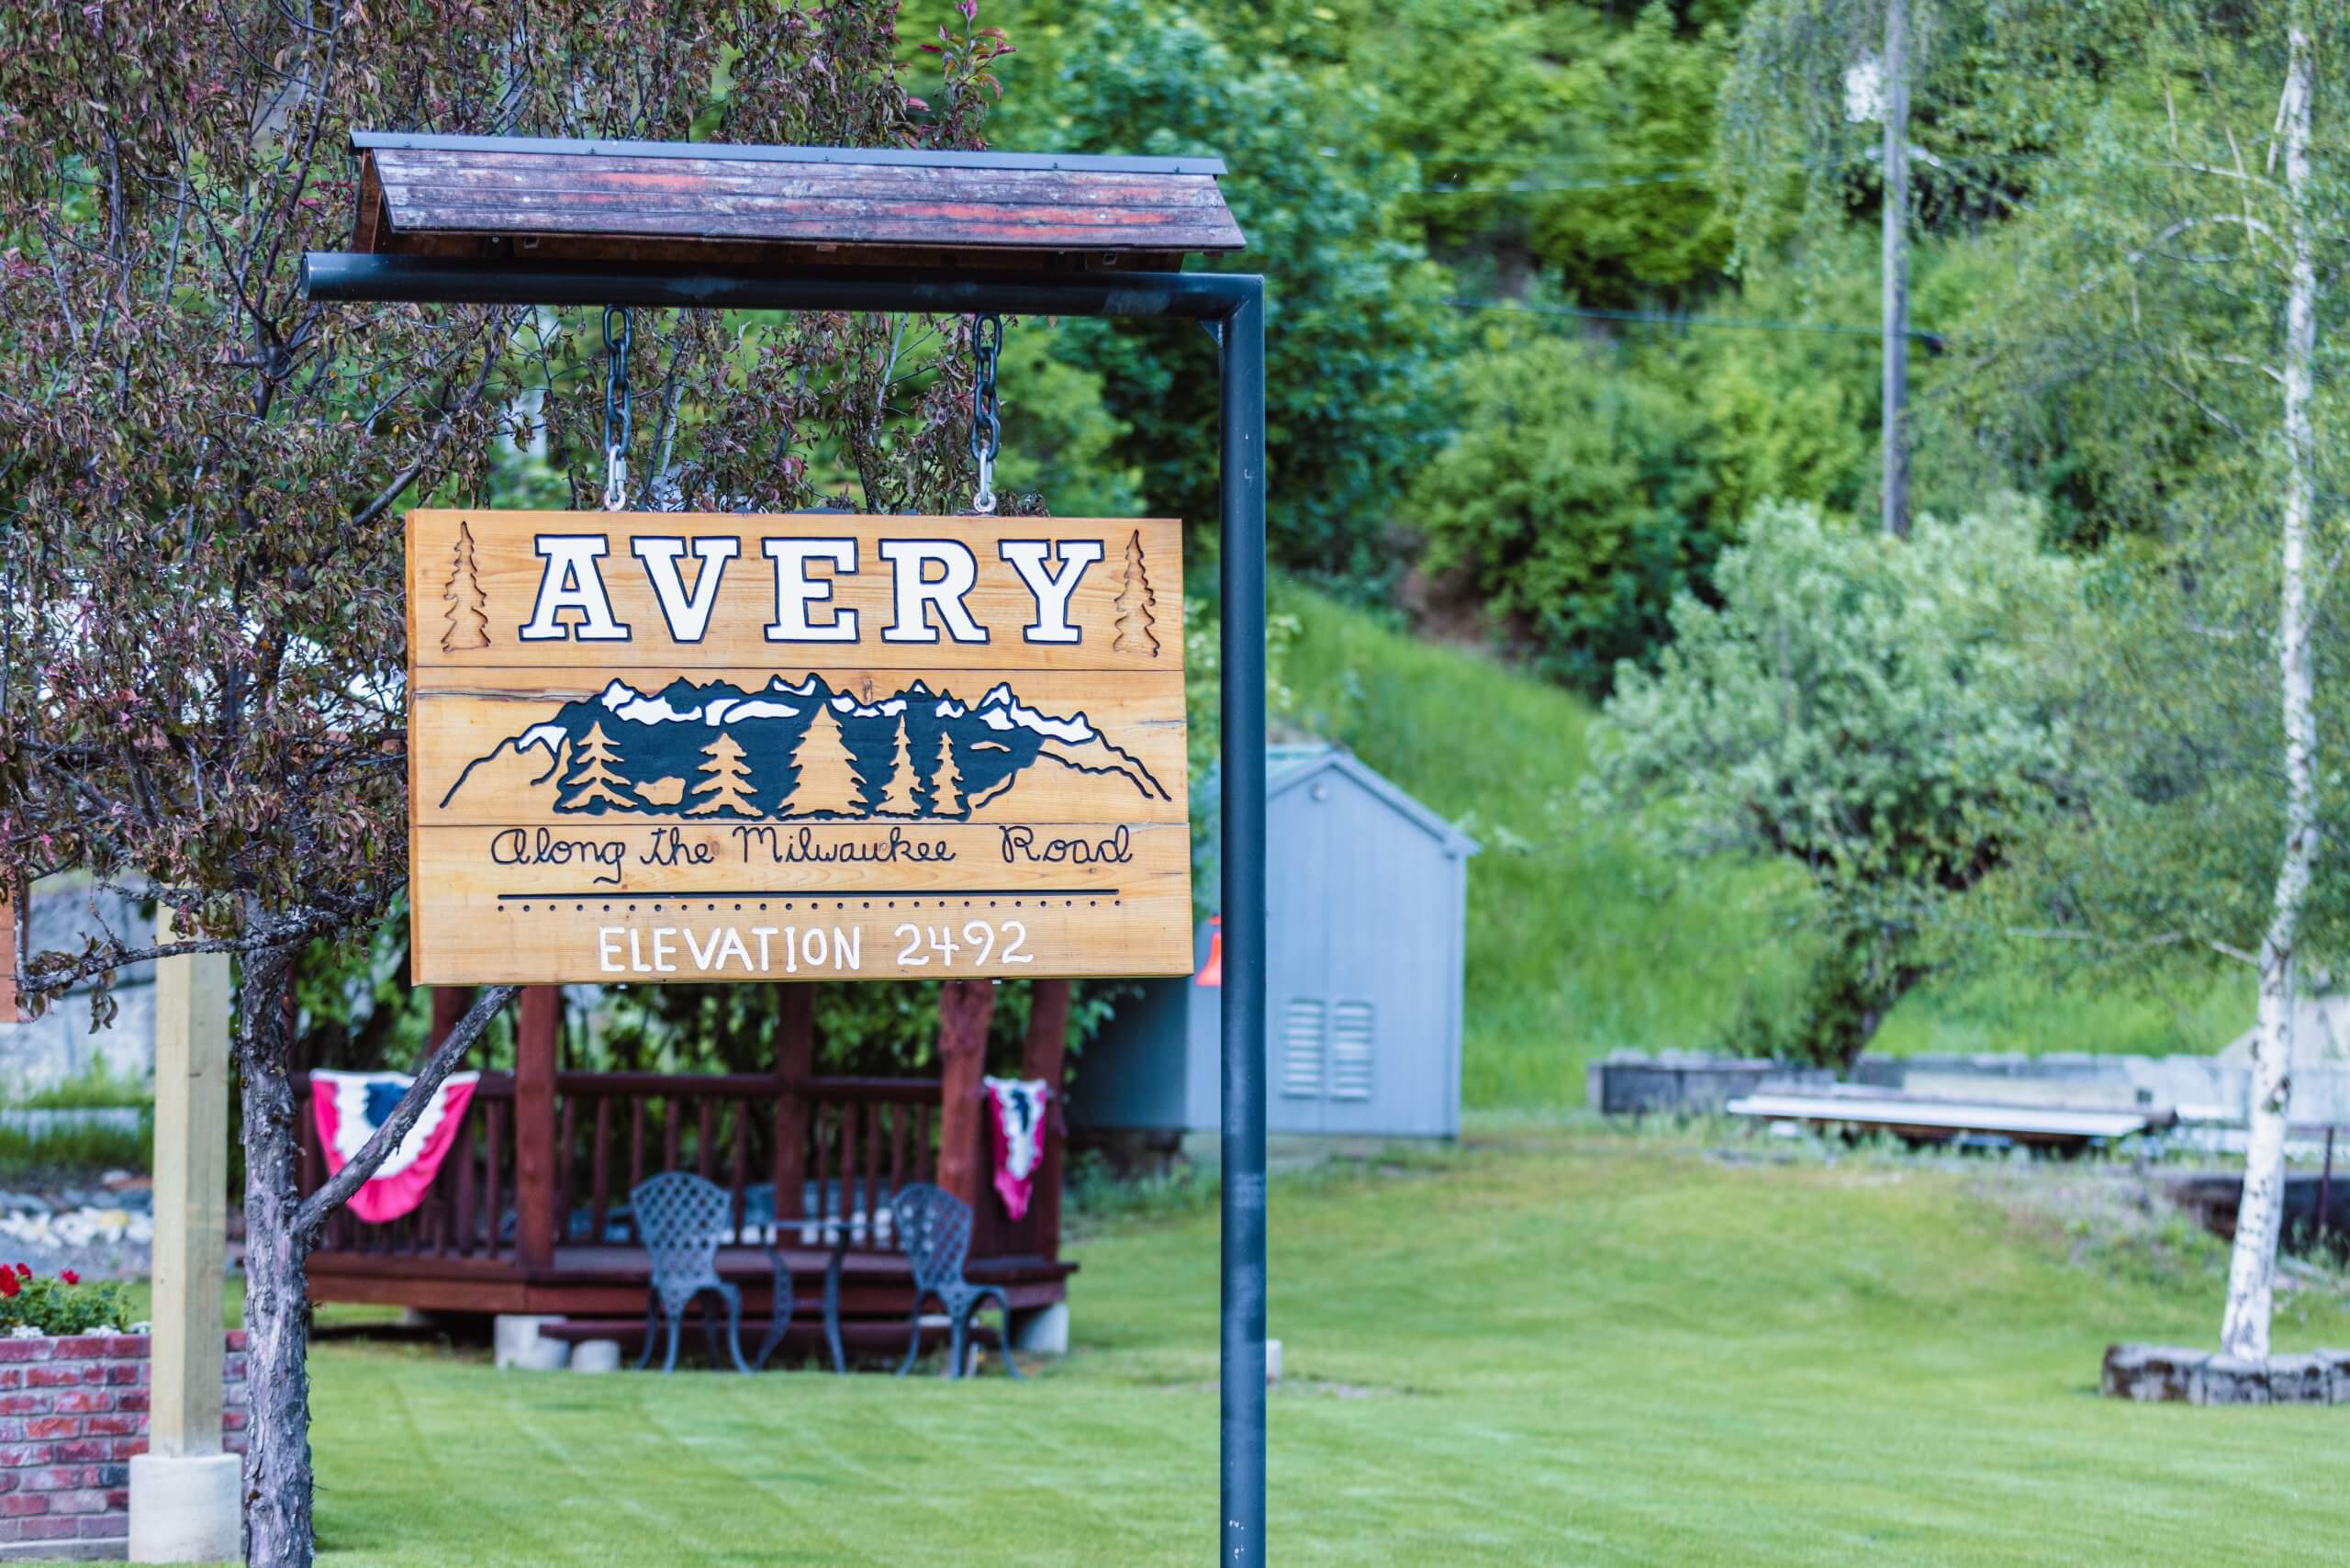 A wooden sign hangs from a post, welcoming visitors to Avery, Idaho.